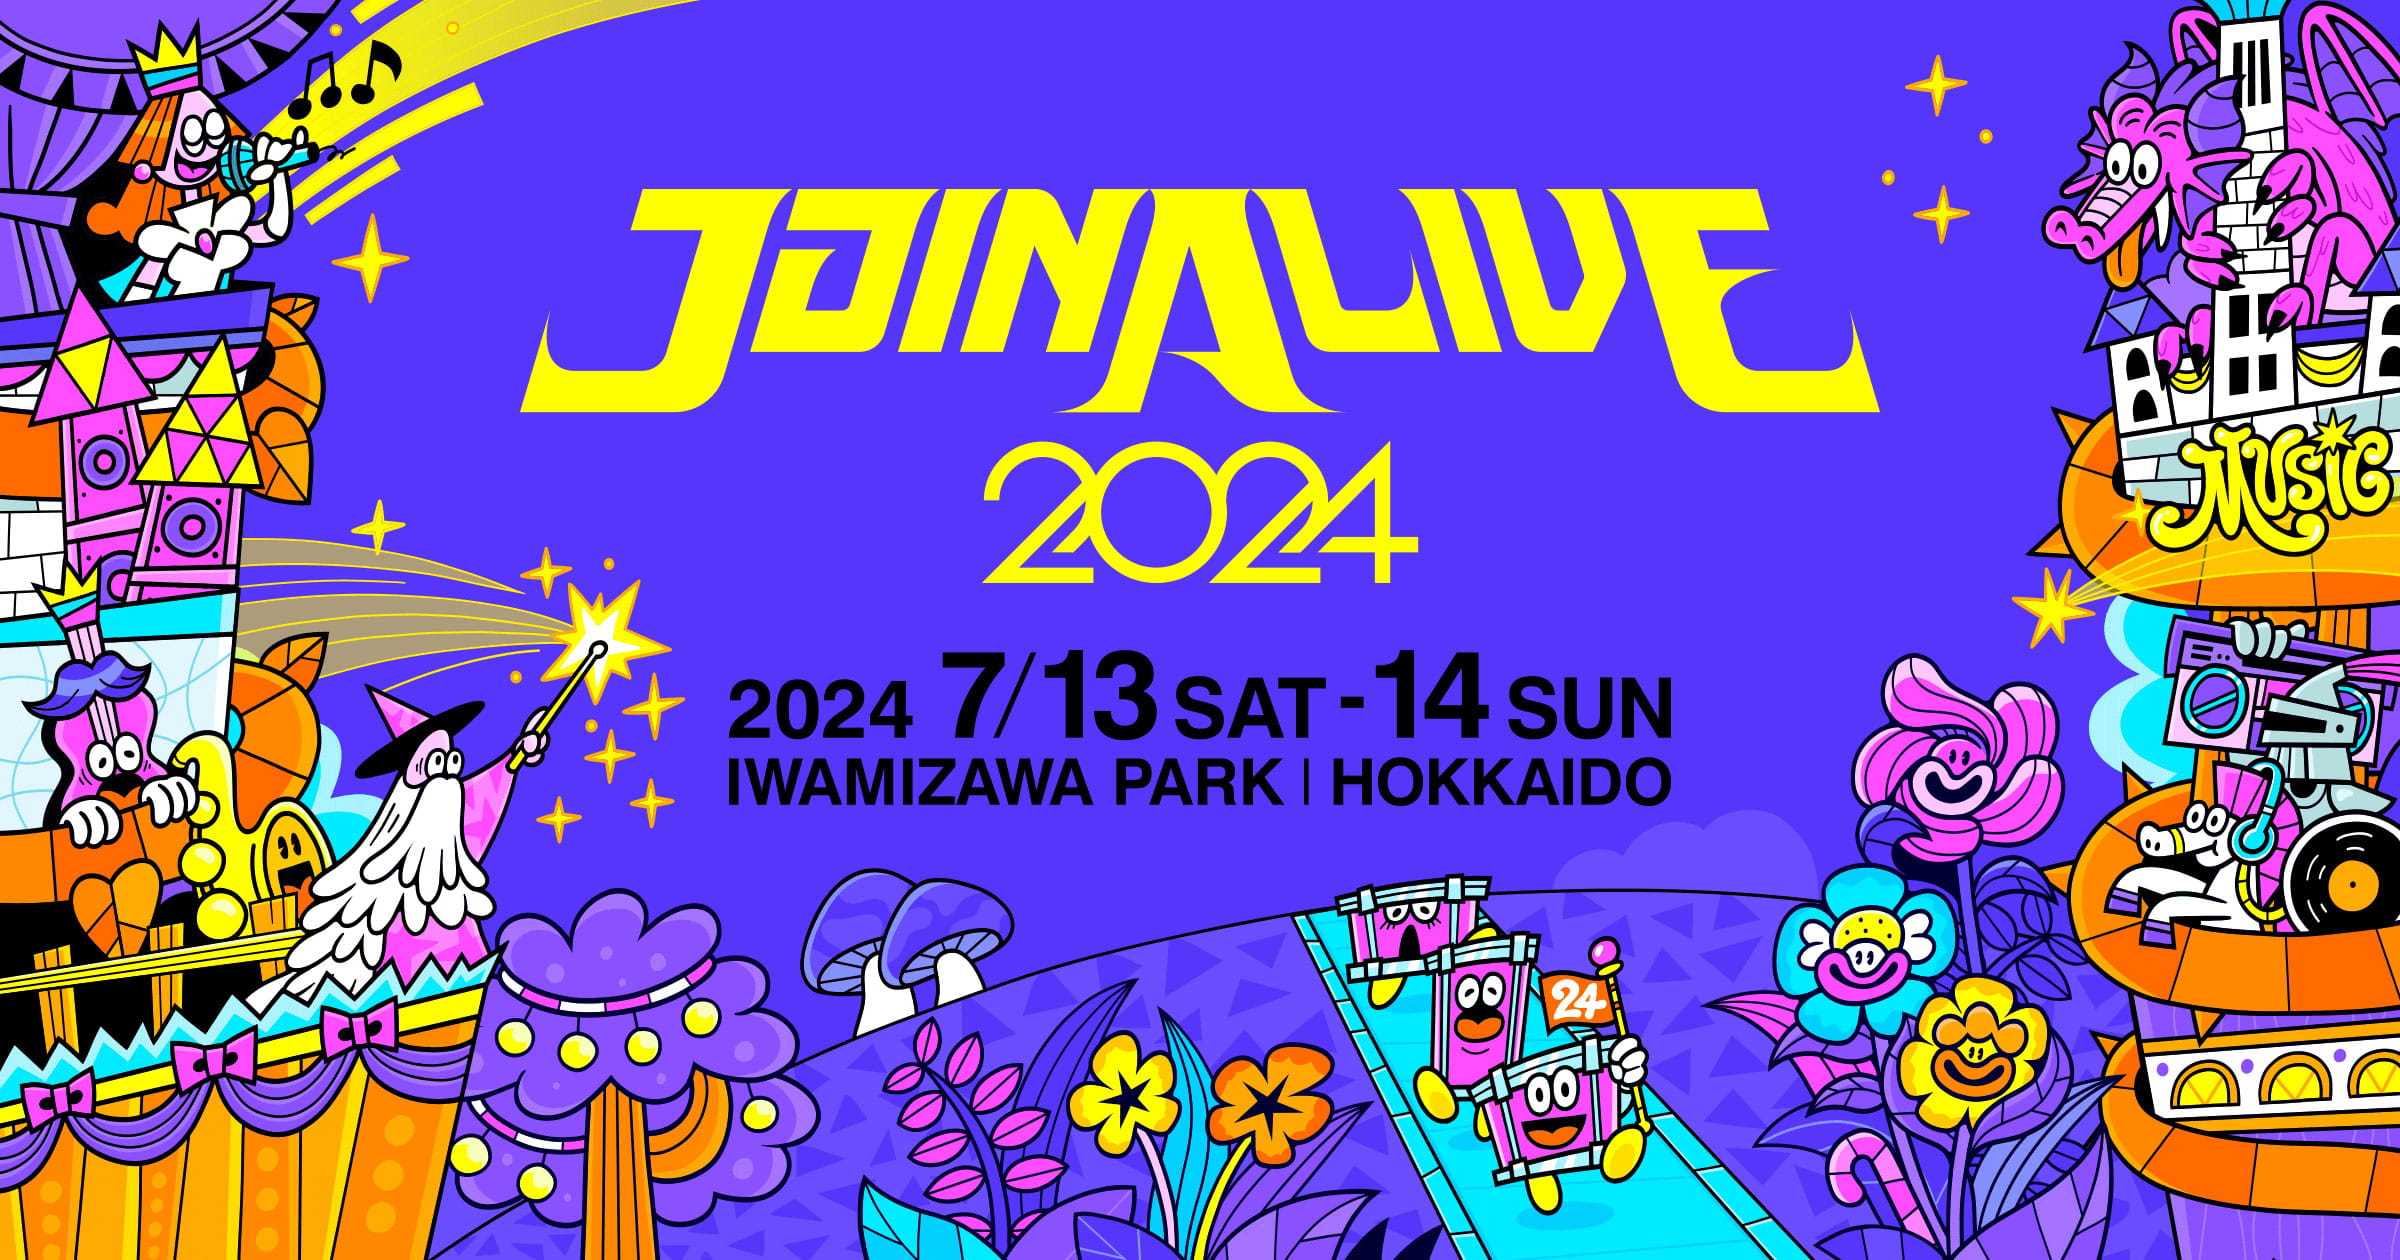 JOIN ALIVE 2024（ジョインアライブ2024）